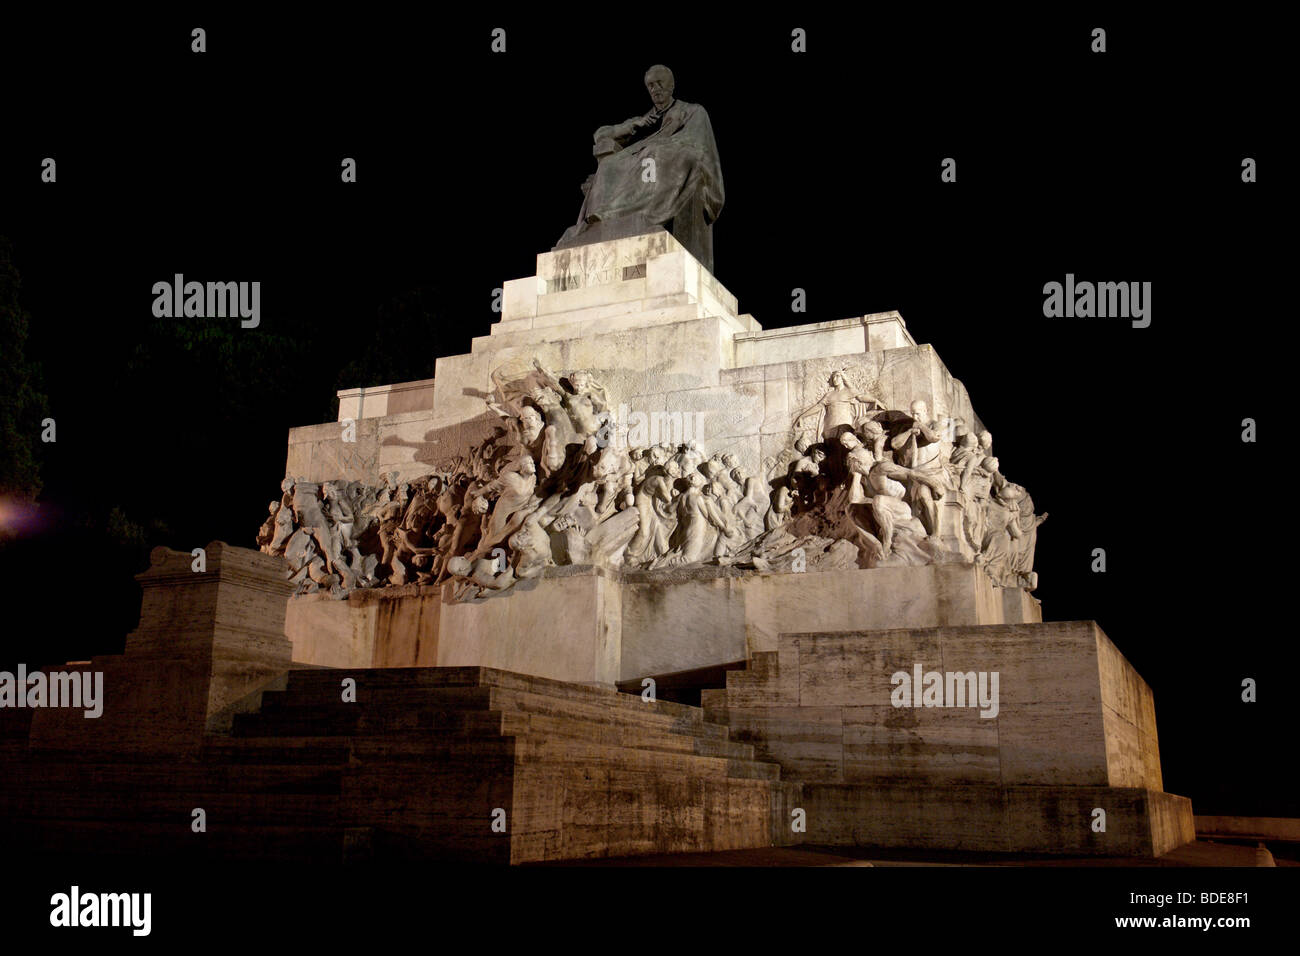 Nocturne view of the monument to Giuseppe Mazzini on the Aventine hill in Rome Stock Photo